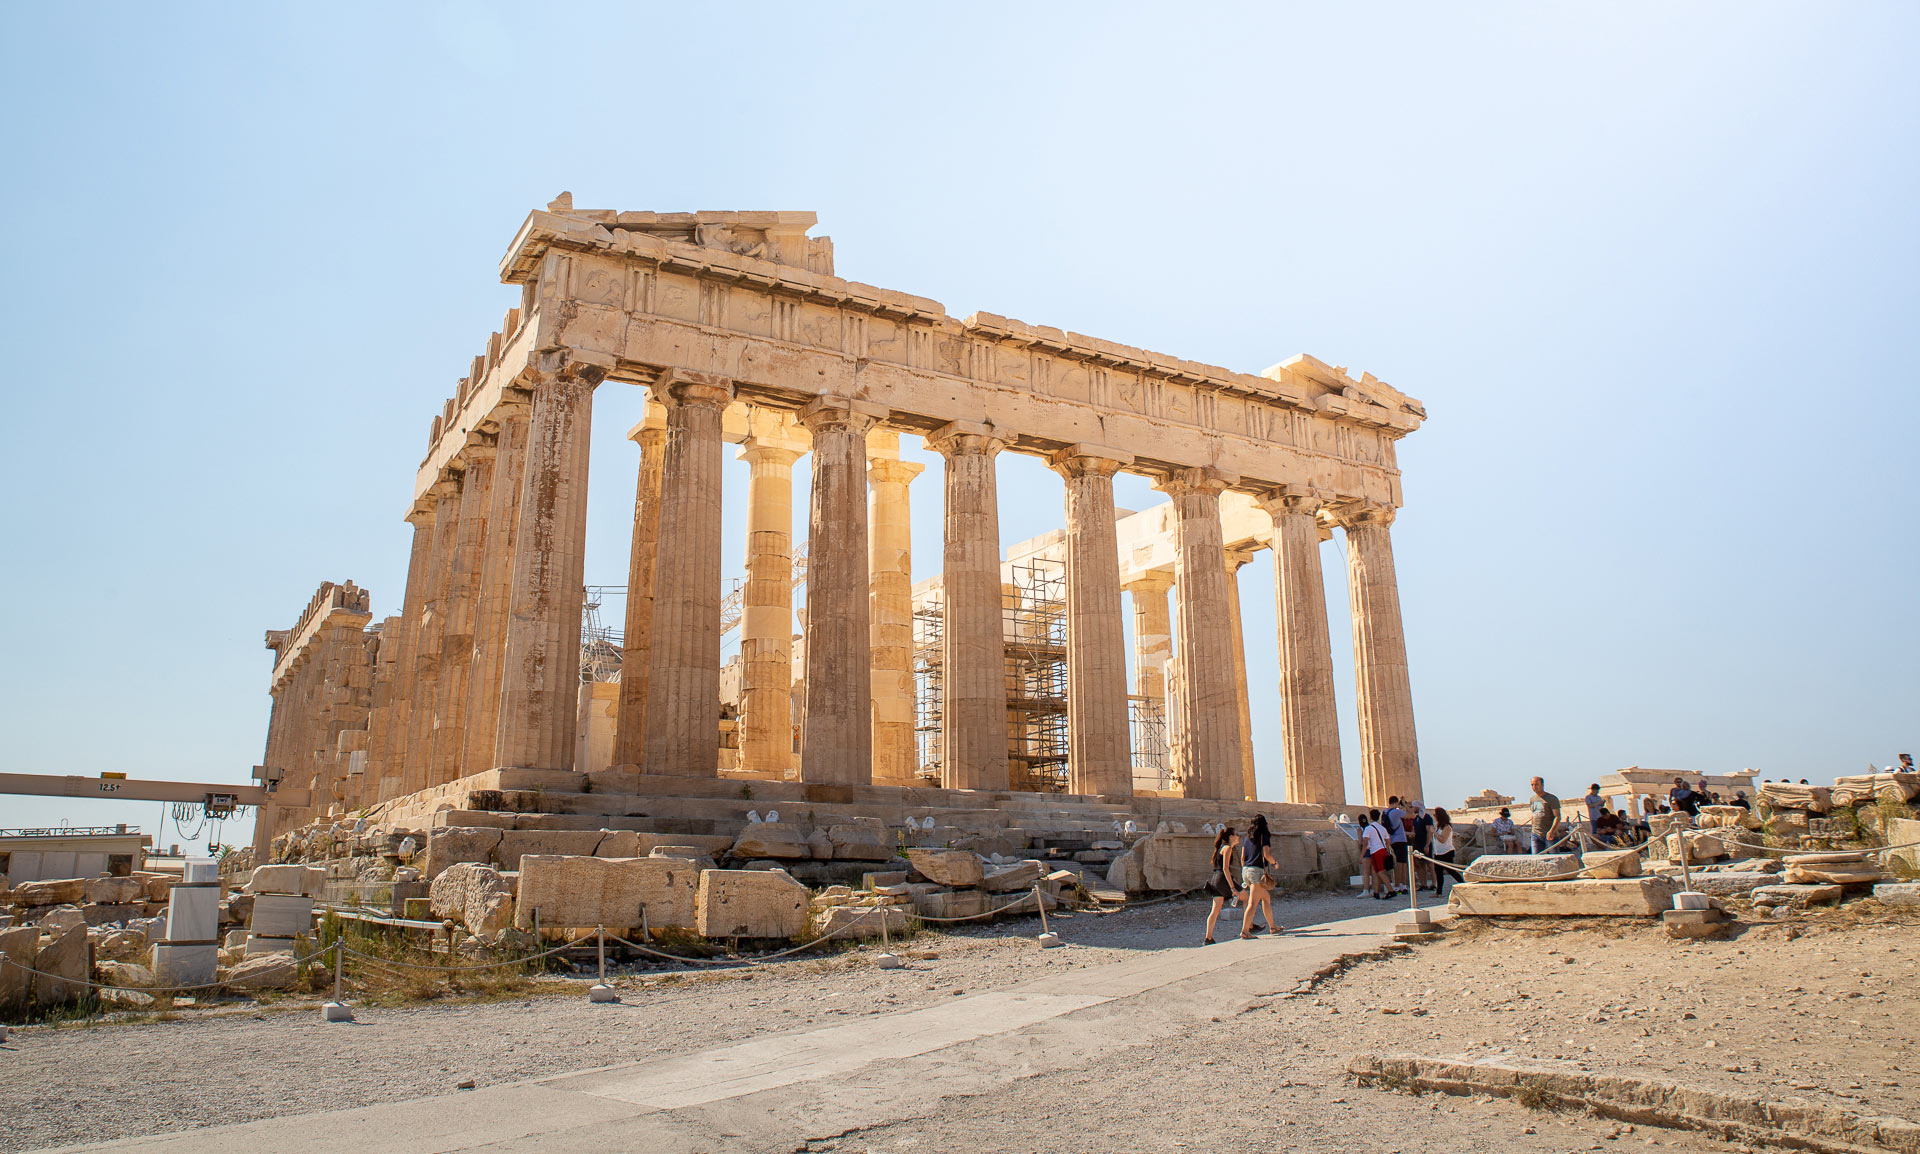 guide to visit athens